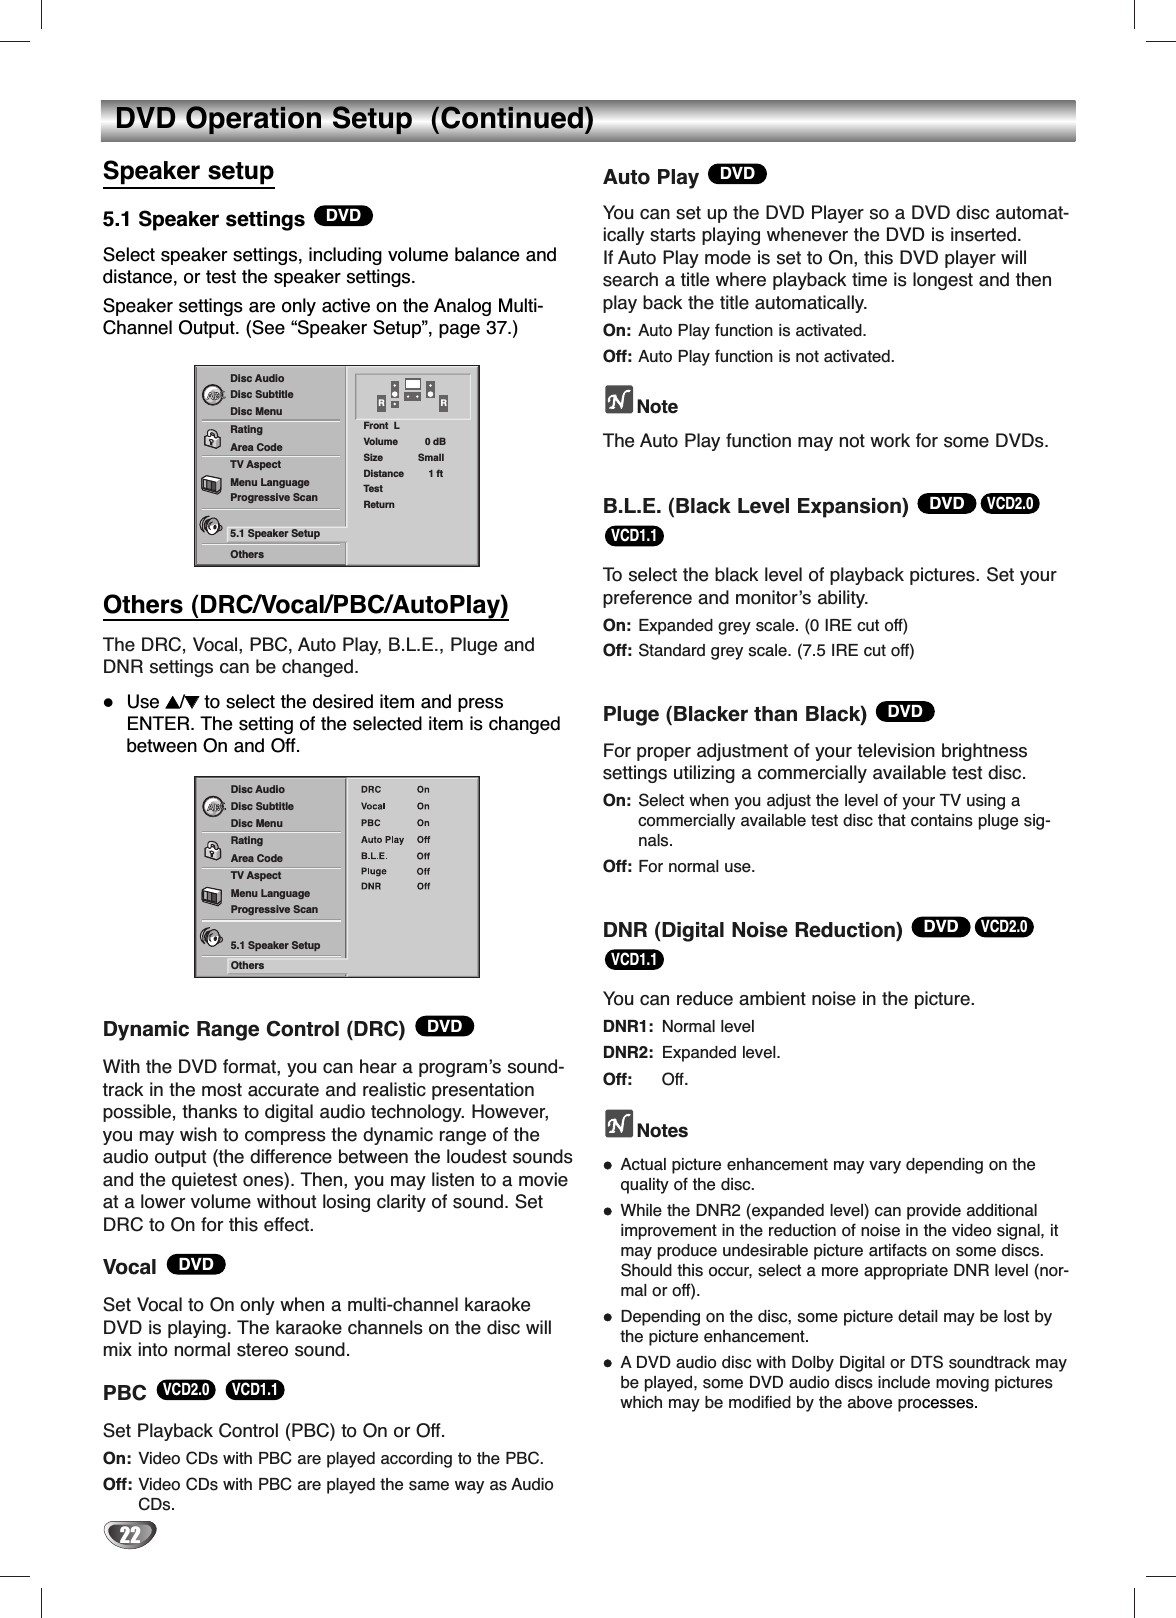 22DVD Operation Setup  (Continued)Speaker setup5.1 Speaker settings Select speaker settings, including volume balance anddistance, or test the speaker settings.Speaker settings are only active on the Analog Multi-Channel Output. (See “Speaker Setup”, page 37.)Others (DRC/Vocal/PBC/AutoPlay)The DRC, Vocal, PBC, Auto Play, B.L.E., Pluge andDNR settings can be changed.Use 33/44to select the desired item and pressENTER. The setting of the selected item is changedbetween On and Off.Dynamic Range Control (DRC)With the DVD format, you can hear a program’s sound-track in the most accurate and realistic presentationpossible, thanks to digital audio technology. However,you may wish to compress the dynamic range of theaudio output (the difference between the loudest soundsand the quietest ones). Then, you may listen to a movieat a lower volume without losing clarity of sound. SetDRC to On for this effect.VocalSet Vocal to On only when a multi-channel karaokeDVD is playing. The karaoke channels on the disc willmix into normal stereo sound.PBCSet Playback Control (PBC) to On or Off.On: Video CDs with PBC are played according to the PBC.Off: Video CDs with PBC are played the same way as AudioCDs.Auto Play You can set up the DVD Player so a DVD disc automat-ically starts playing whenever the DVD is inserted. If Auto Play mode is set to On, this DVD player willsearch a title where playback time is longest and thenplay back the title automatically. On: Auto Play function is activated.Off: Auto Play function is not activated.NoteThe Auto Play function may not work for some DVDs.B.L.E. (Black Level Expansion) To  select the black level of playback pictures. Set yourpreference and monitor’s ability.On: Expanded grey scale. (0 IRE cut off)Off: Standard grey scale. (7.5 IRE cut off)Pluge (Blacker than Black) For proper adjustment of your television brightness settings utilizing a commercially available test disc.On: Select when you adjust the level of your TV using a commercially available test disc that contains pluge sig-nals.Off: For normal use.DNR (Digital Noise Reduction) You can reduce ambient noise in the picture.DNR1: Normal levelDNR2: Expanded level.Off: Off.NotesActual picture enhancement may vary depending on thequality of the disc.While the DNR2 (expanded level) can provide additionalimprovement in the reduction of noise in the video signal, itmay produce undesirable picture artifacts on some discs.Should this occur, select a more appropriate DNR level (nor-mal or off).Depending on the disc, some picture detail may be lost bythe picture enhancement.ADVD audio disc with Dolby Digital or DTS soundtrack maybe played, some DVD audio discs include moving pictureswhich may be modified by the above processes.VCD1.1VCD2.0DVDDVDVCD1.1VCD2.0DVDDVDVCD1.1VCD2.0DVDDVDDVDDisc SubtitleDisc MenuRatingArea CodeTV AspectMenu LanguageProgressive Scan5.1 Speaker SetupOthersDisc AudioDisc SubtitleDisc MenuRatingArea CodeTV AspectMenu LanguageProgressive Scan5.1 Speaker SetupOthersDisc AudioR RFront  LVolume          0 dBSize             SmallDistance         1 ftTestReturn